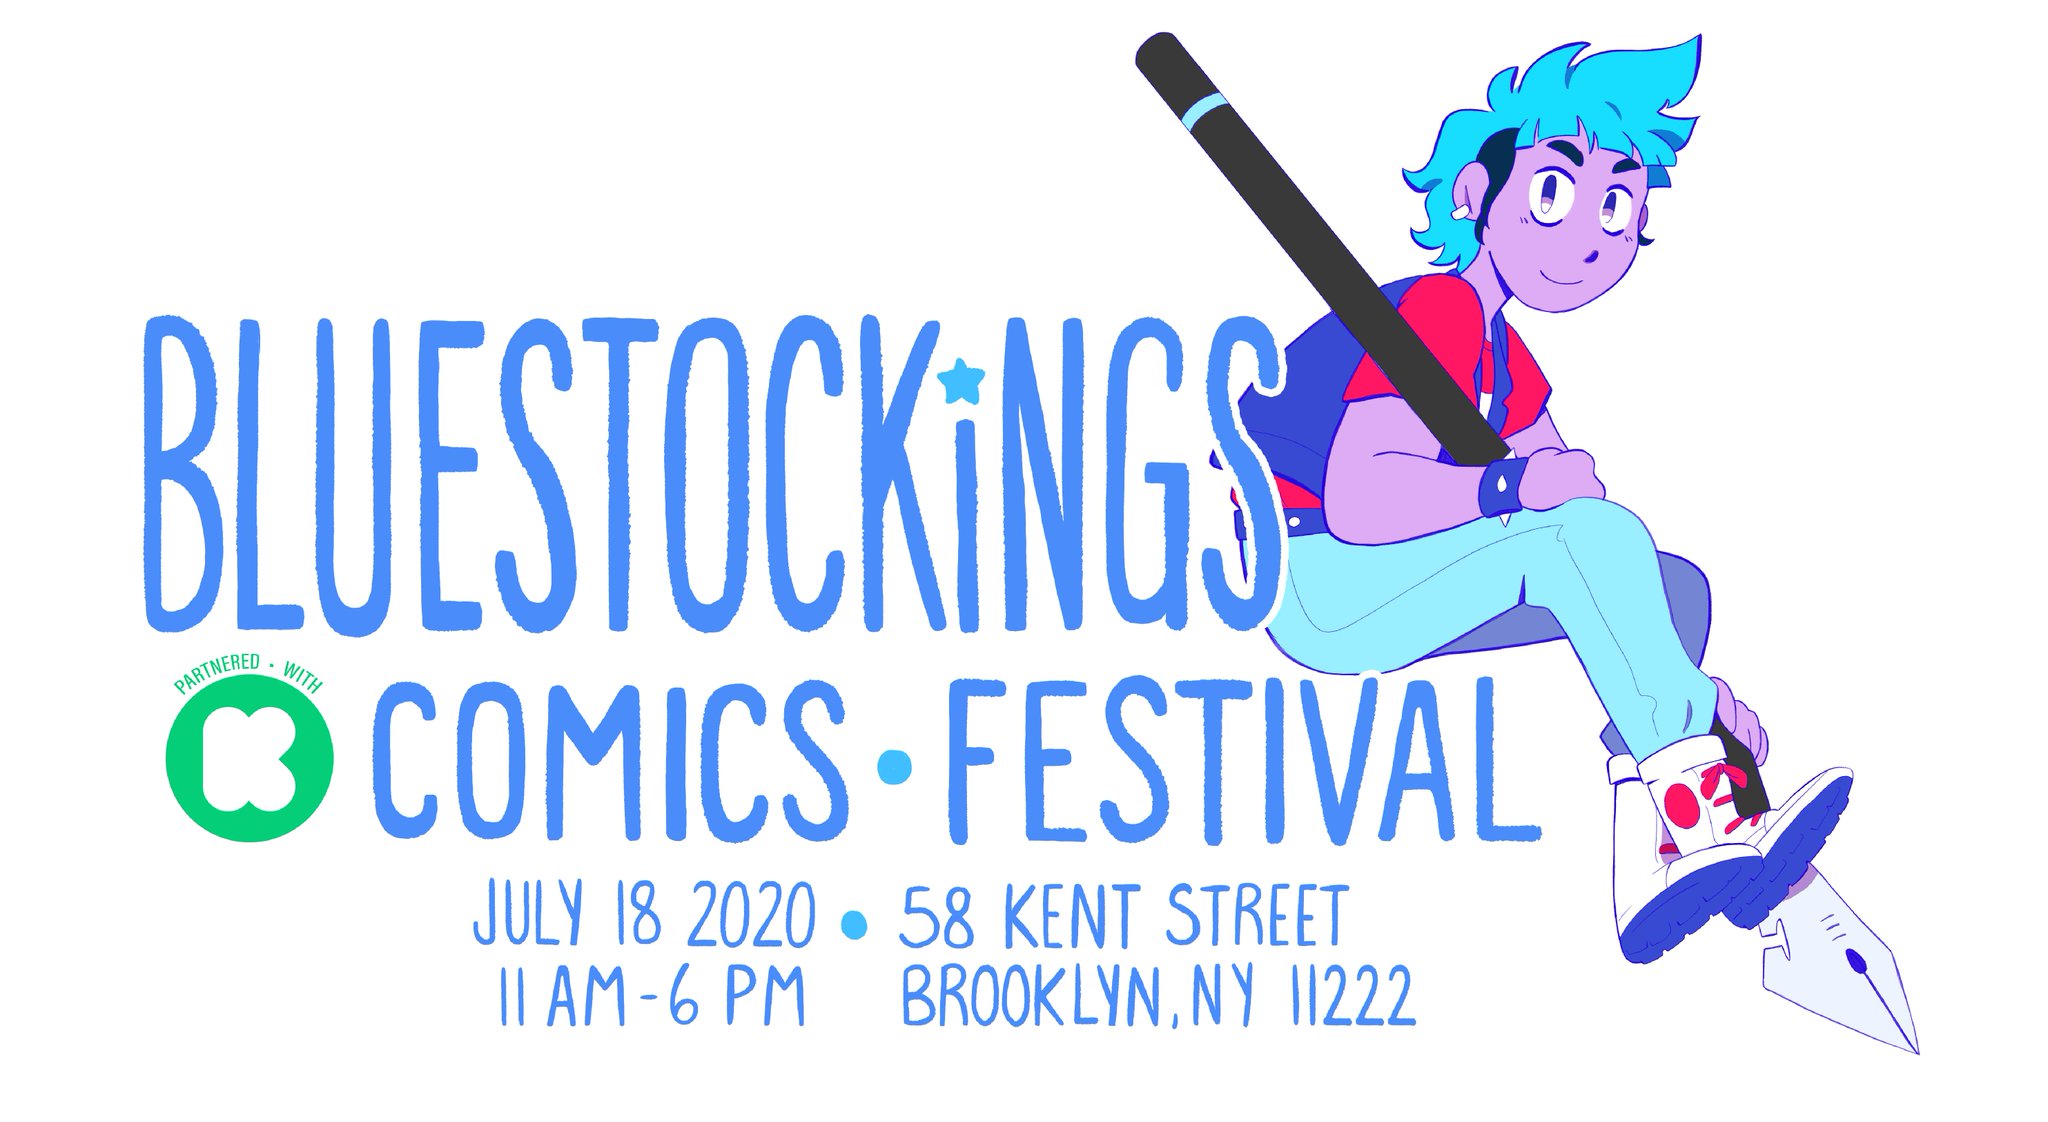 “EXCLUSIVE: @Bluestockings Comics Festival returns in July — this time at @...